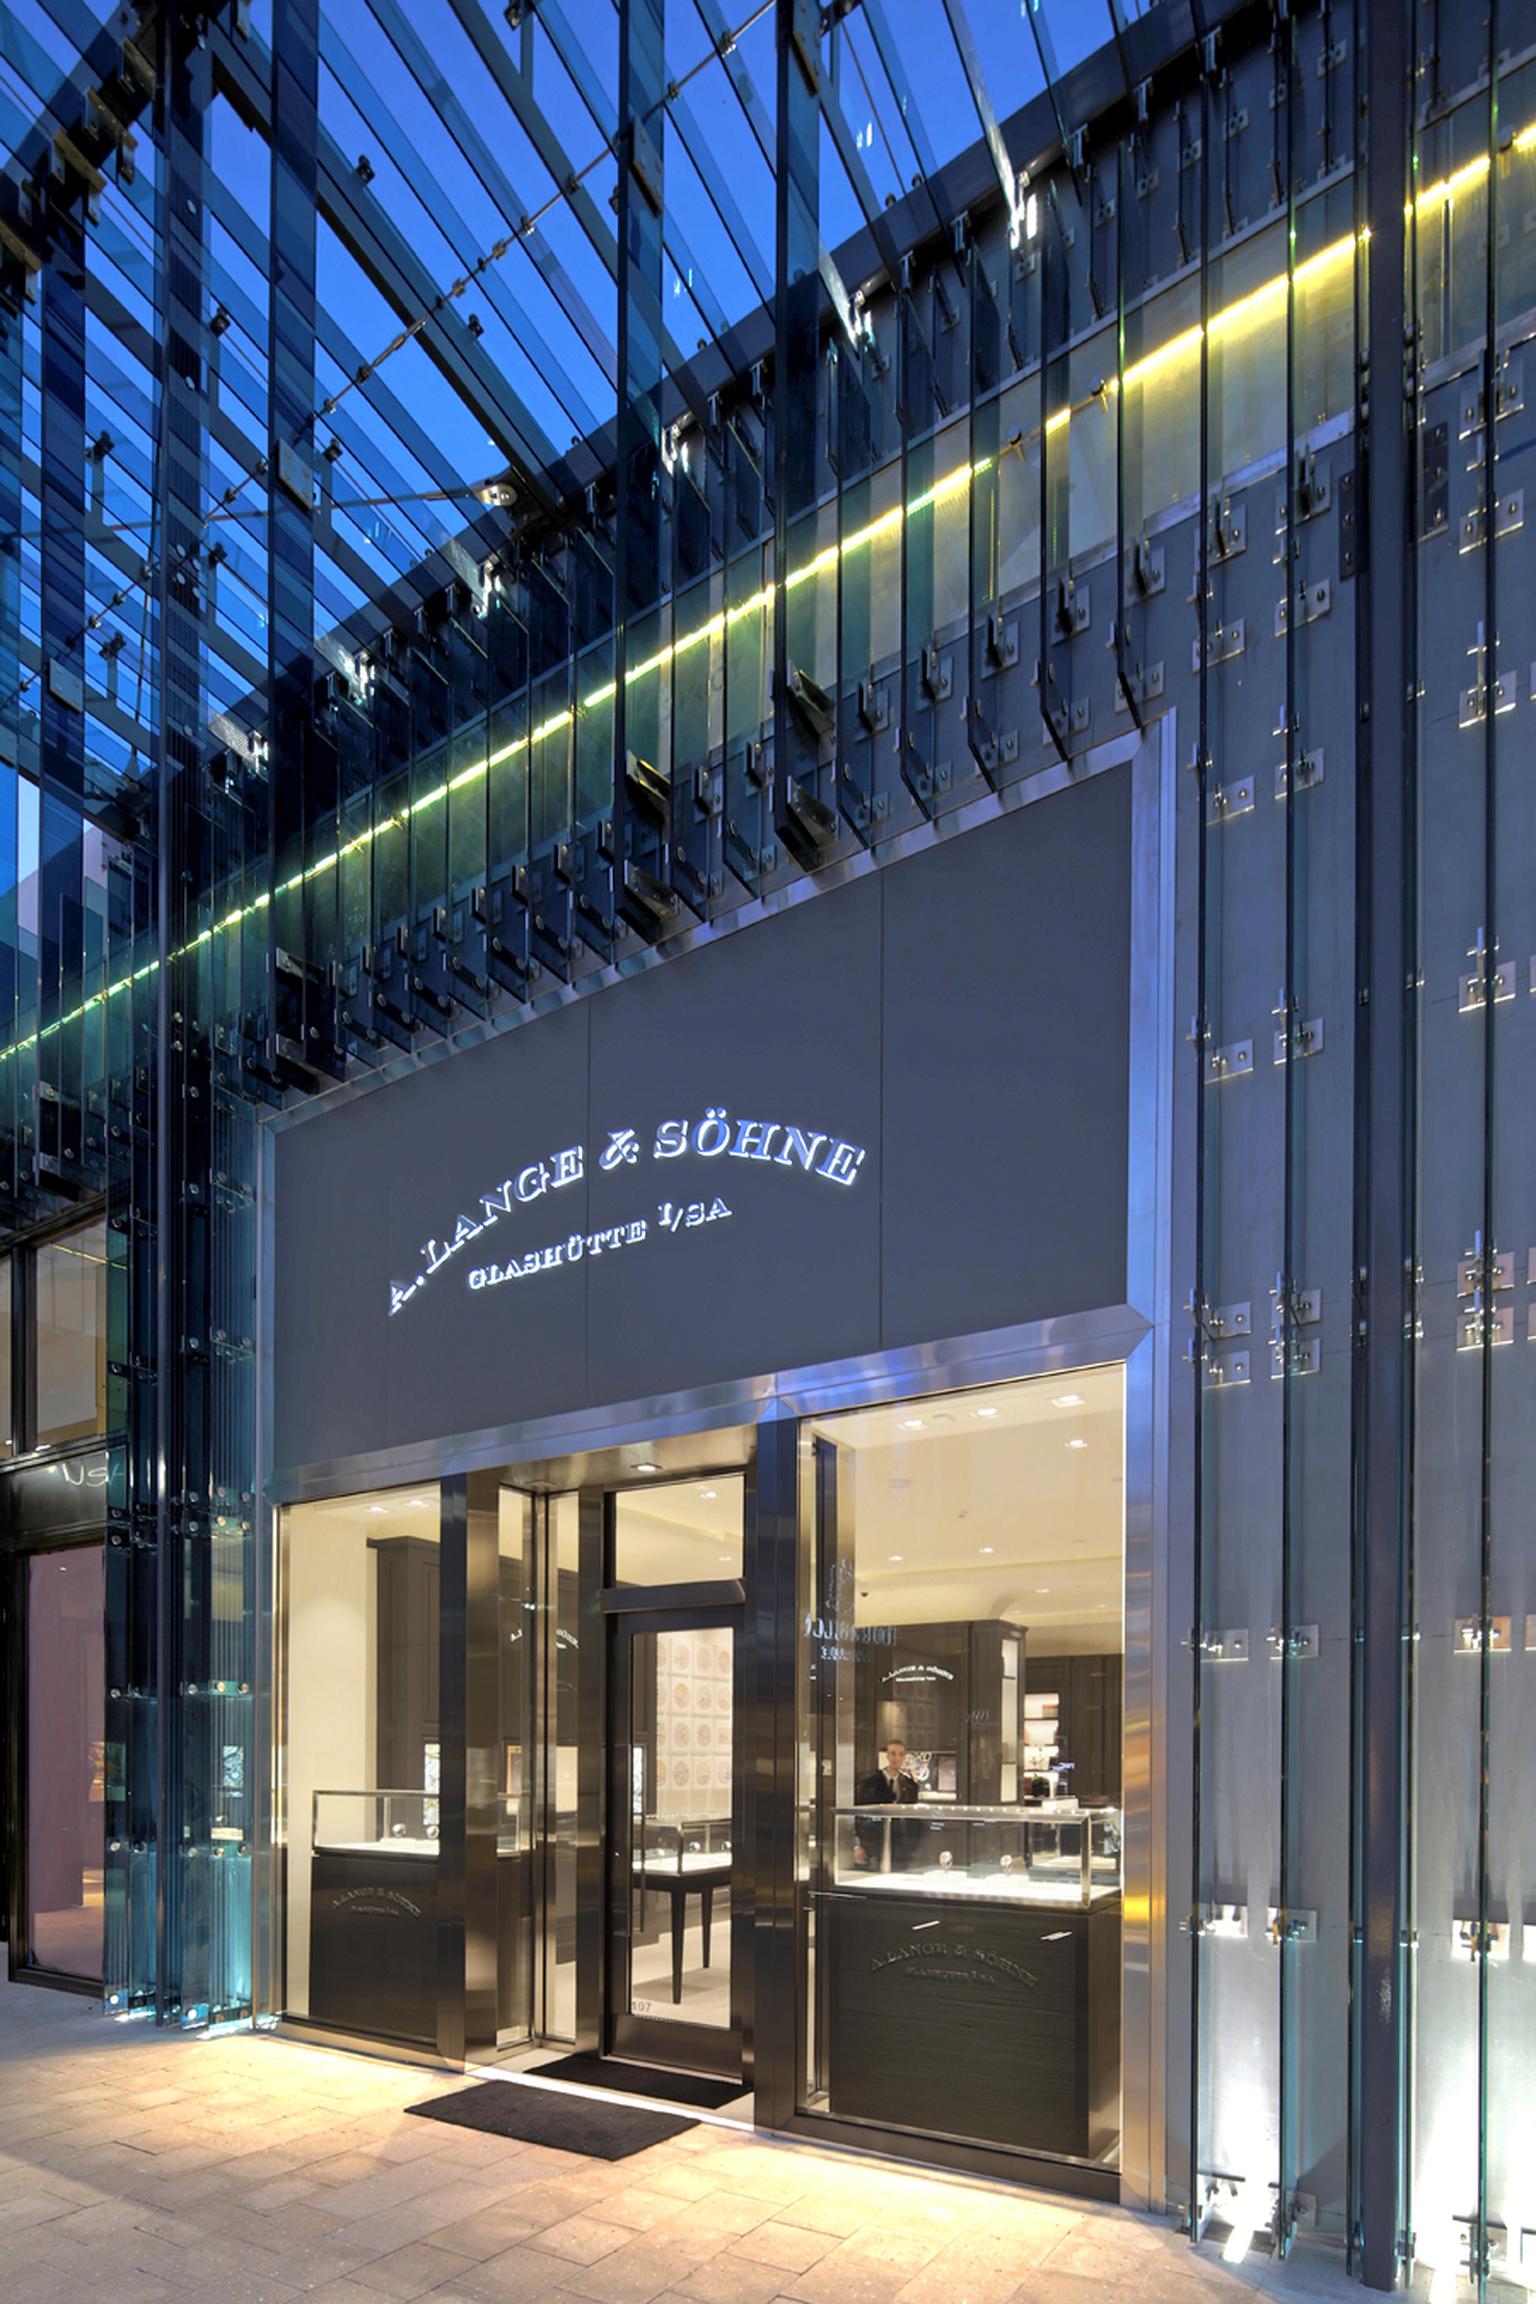 German watchmaker A Lange & Sohne has opened a store in the revamped Miami Design District.